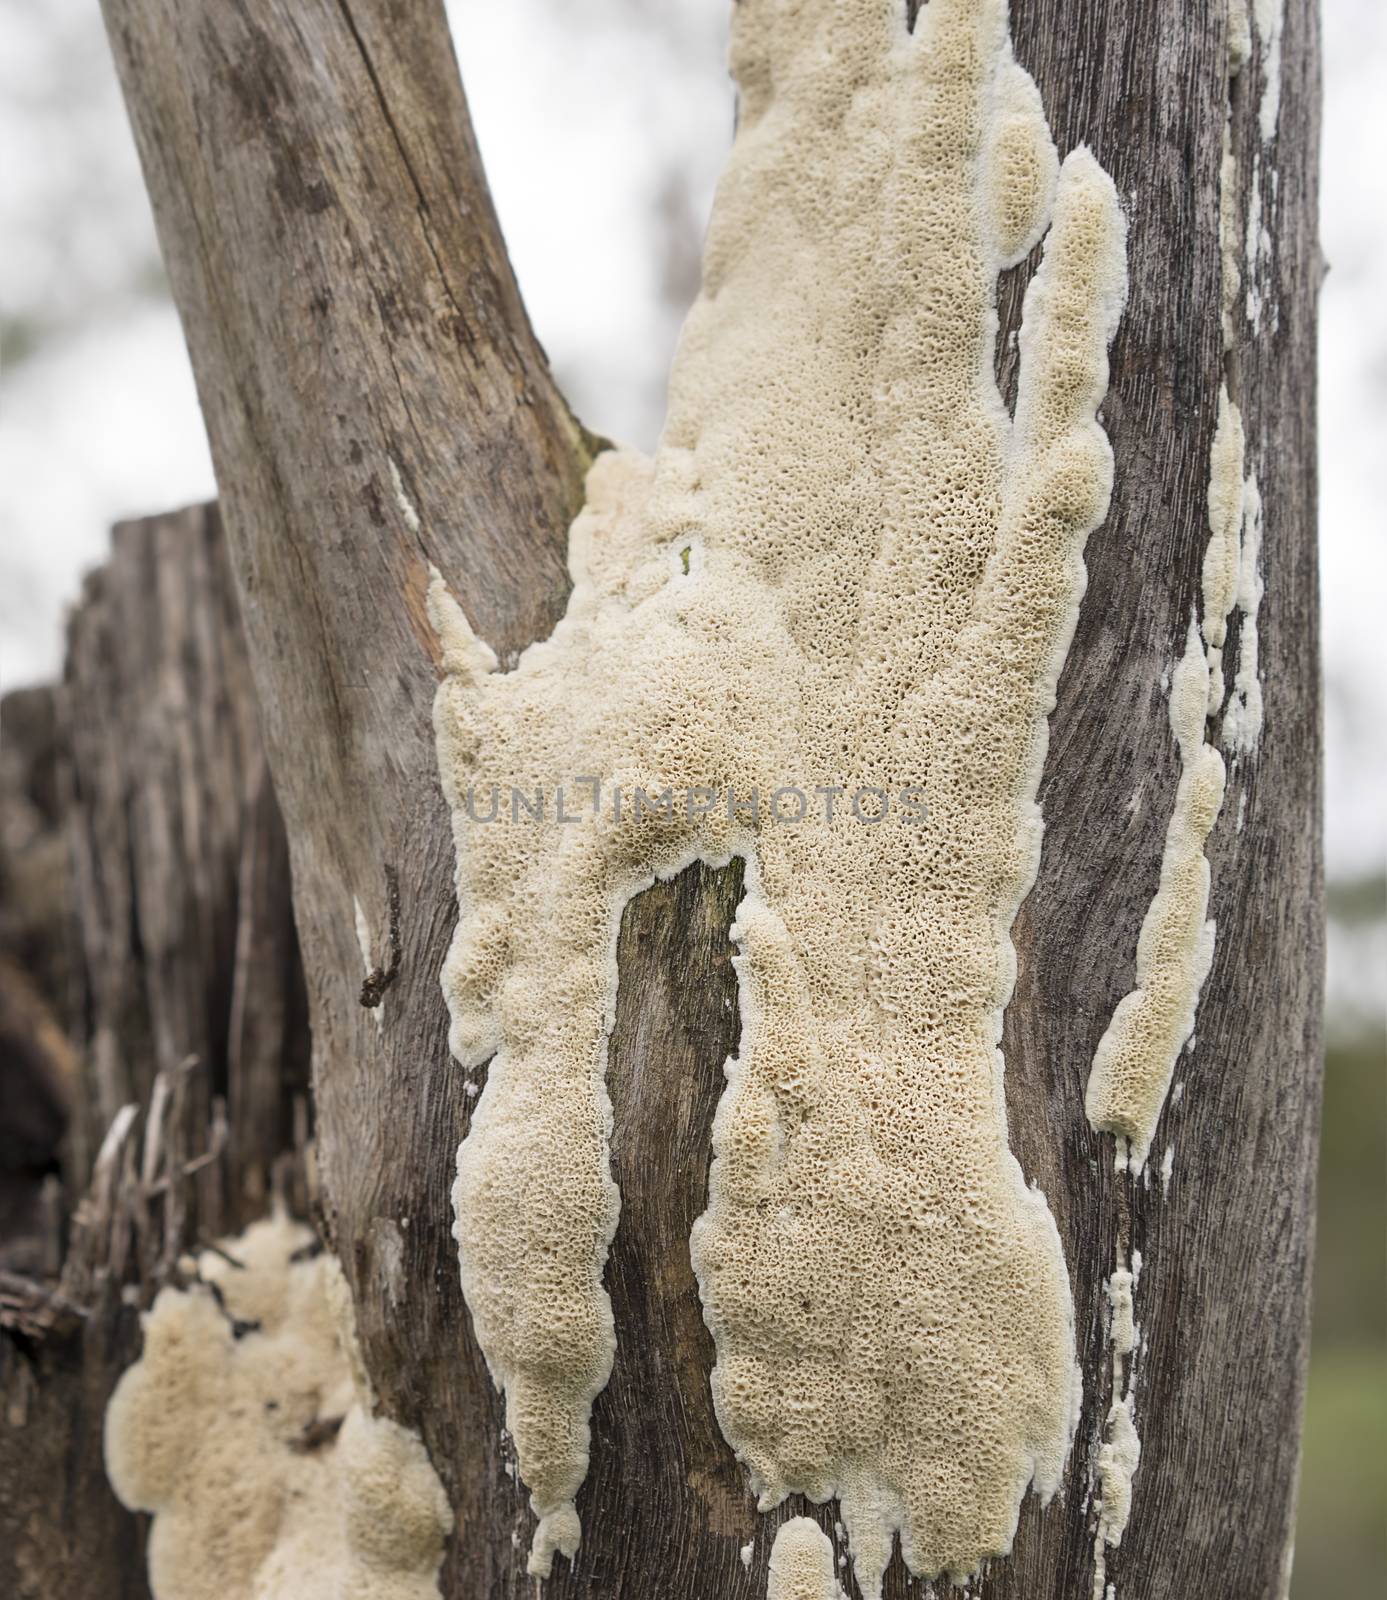 Large Fruiting Body of Australian Polypore Fungus Growing on Spotted Gum  Eucalypt Stump after Rain